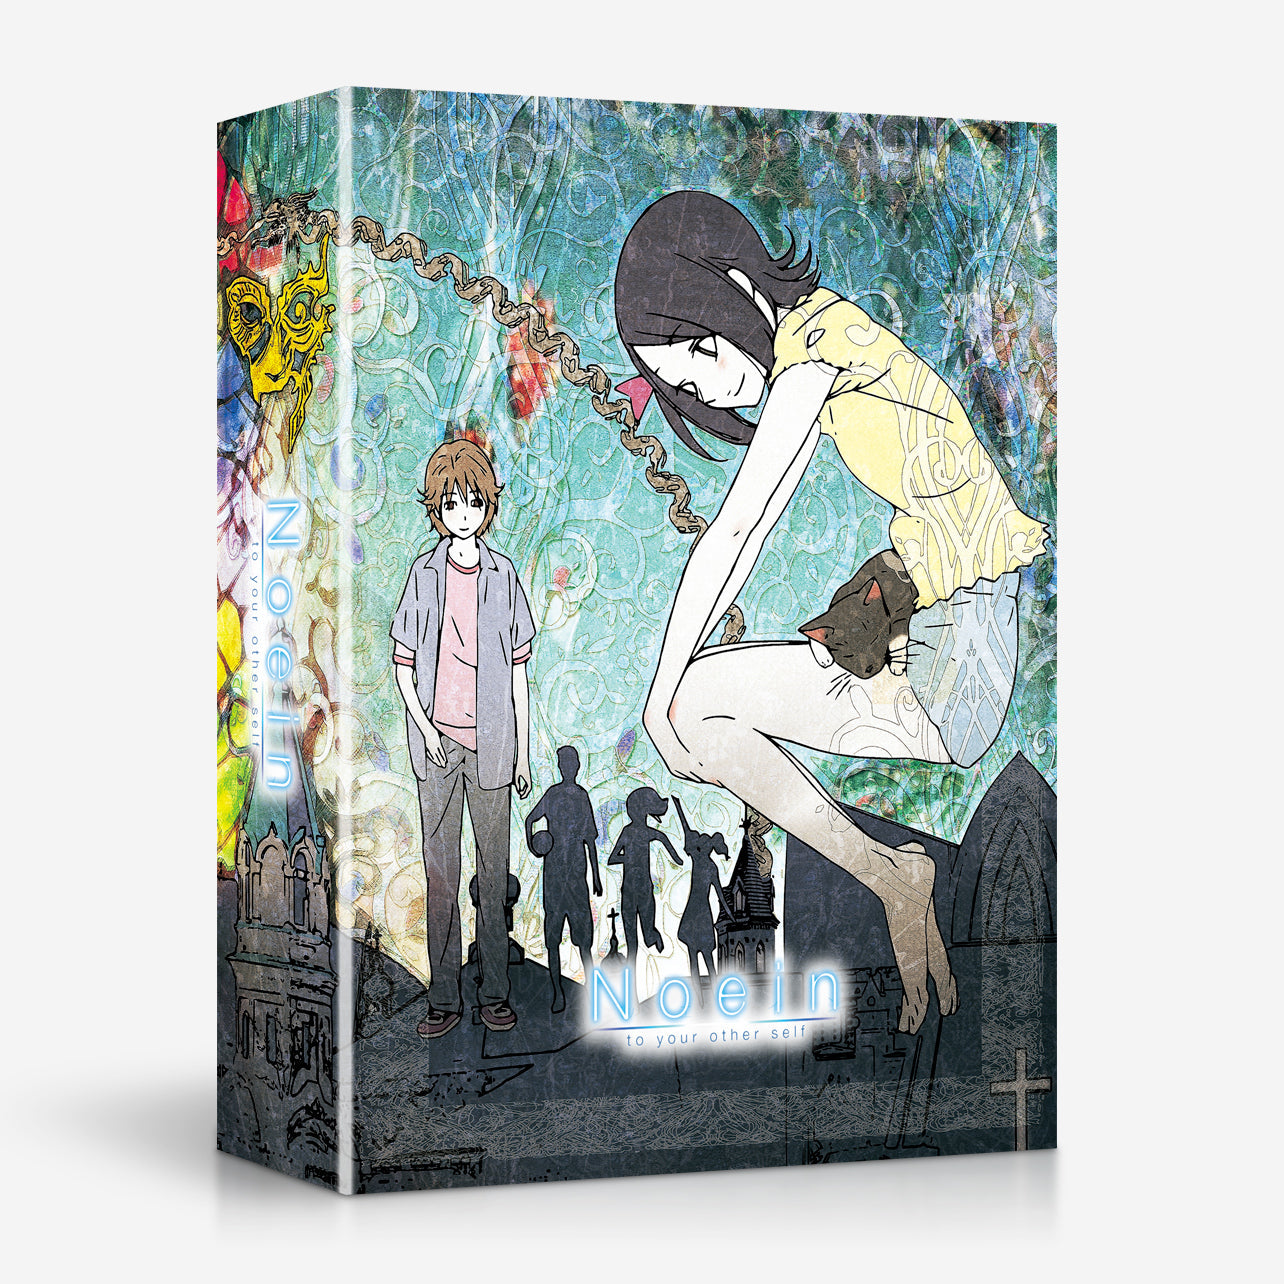 Noein - The Complete Series - Limited Edition - Blu-ray + DVD image count 0